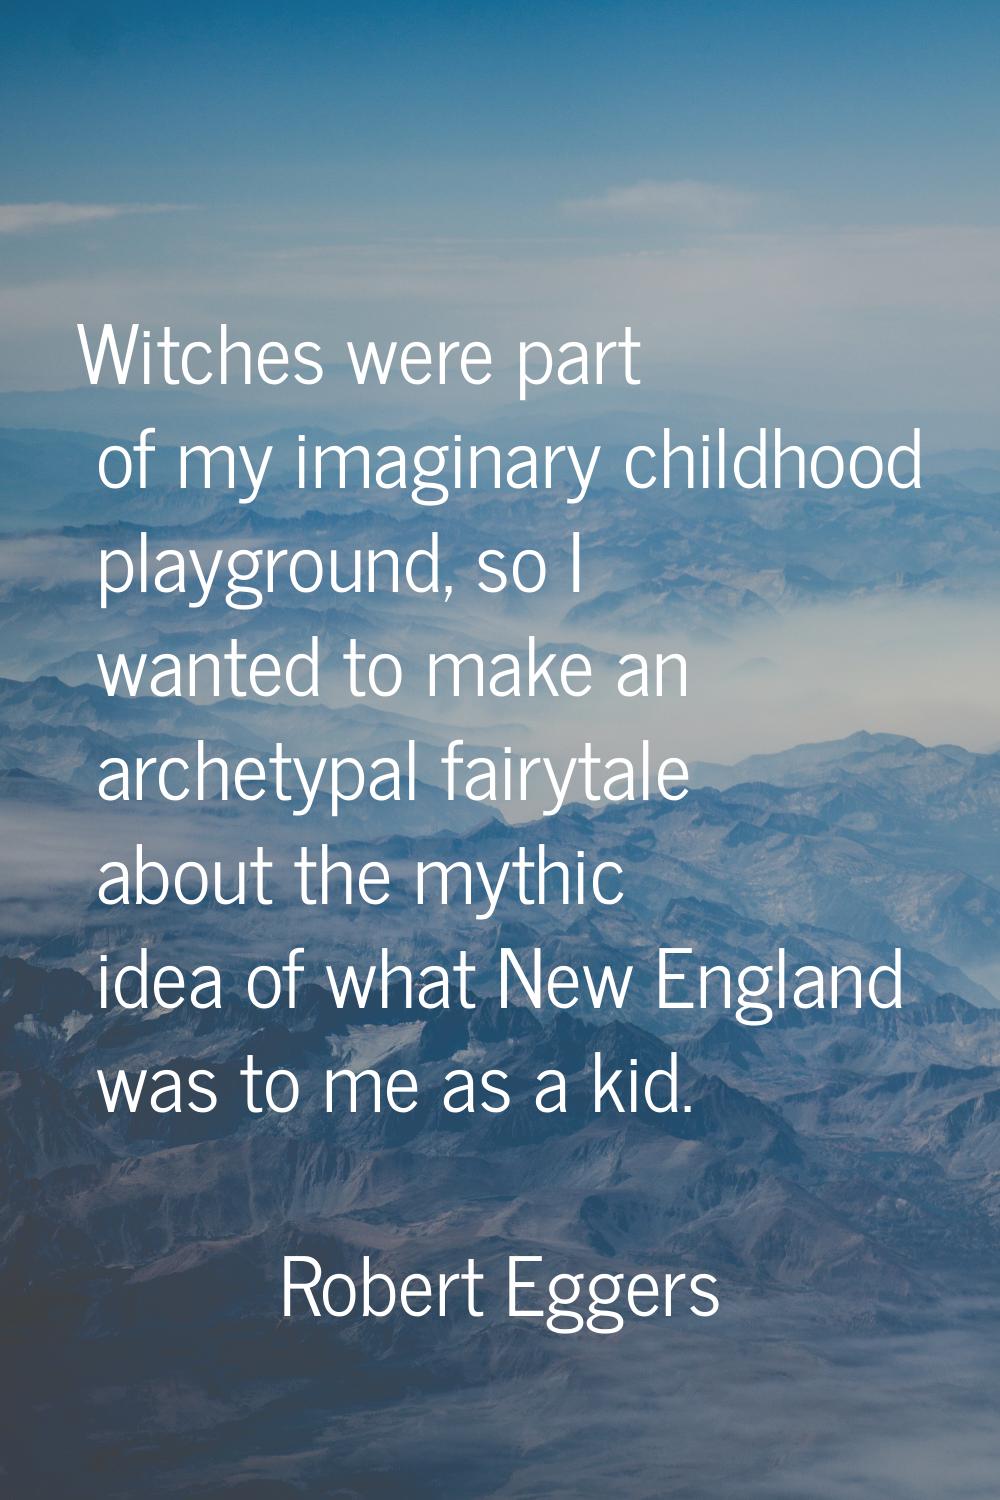 Witches were part of my imaginary childhood playground, so I wanted to make an archetypal fairytale